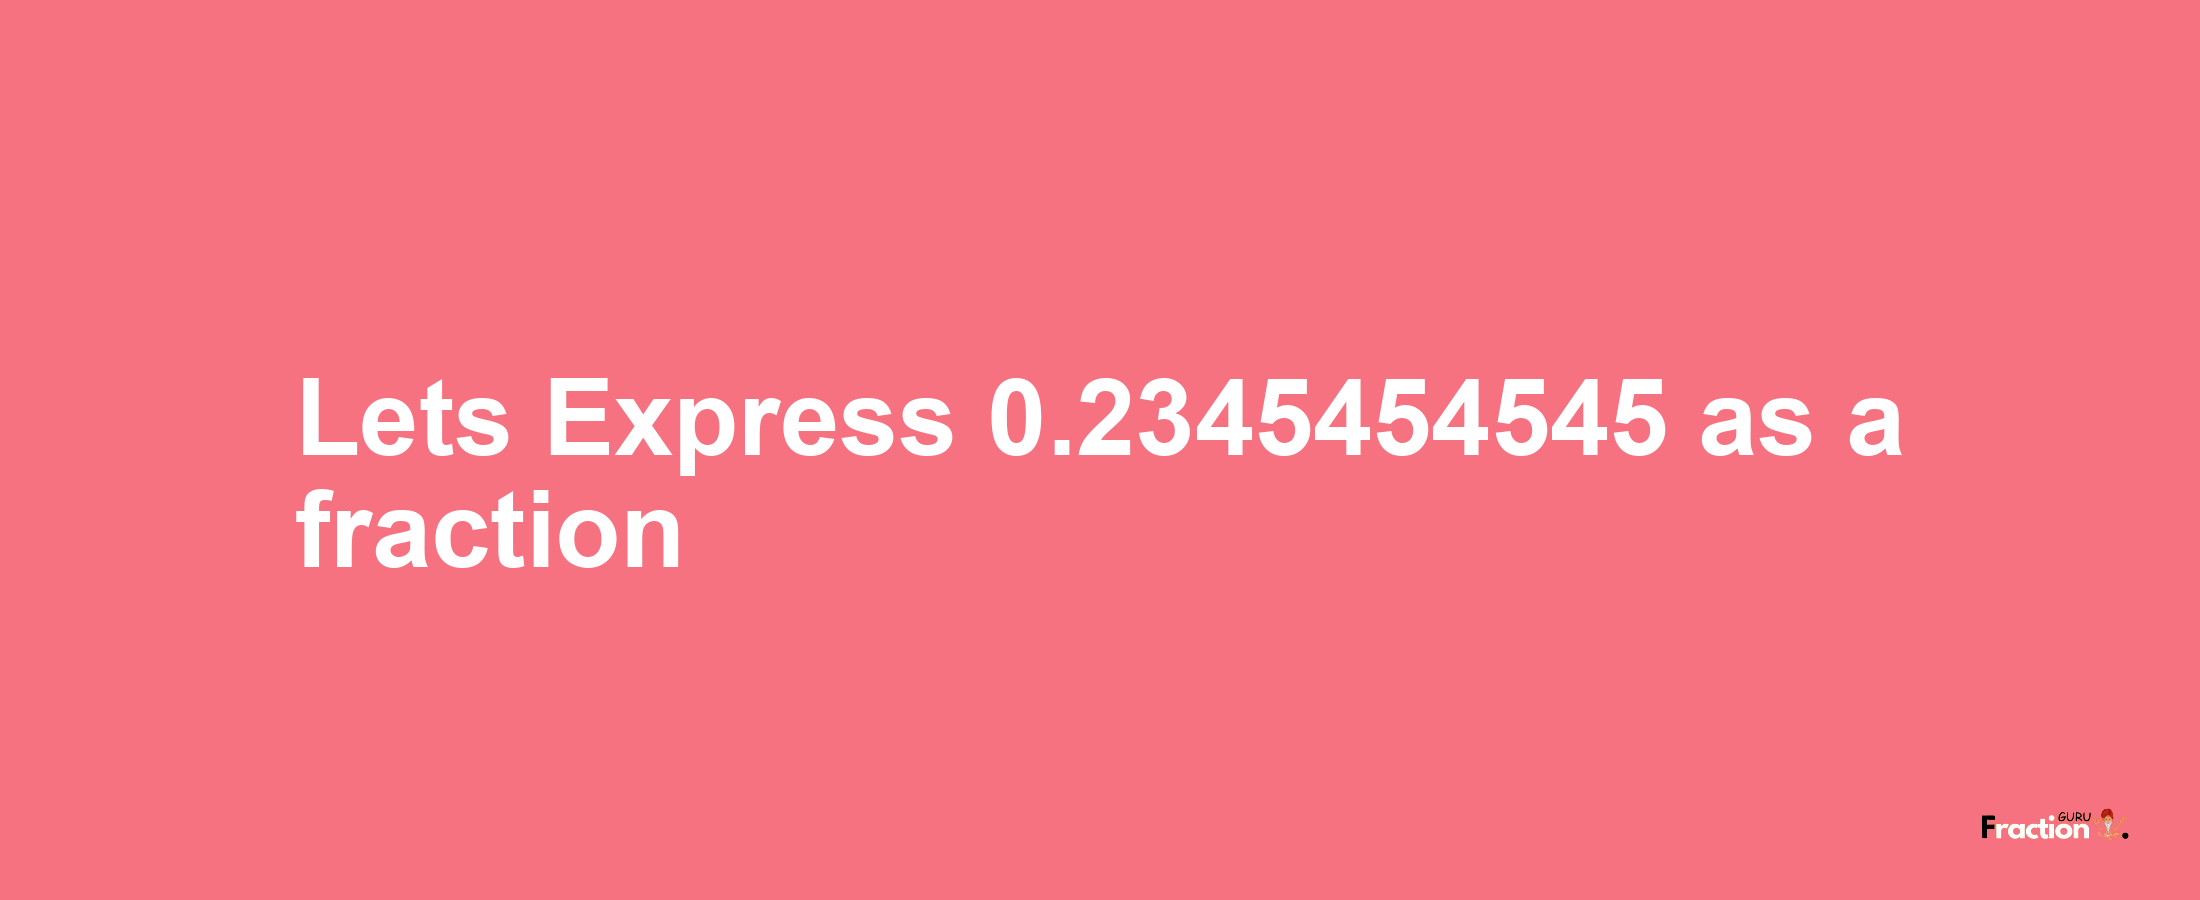 Lets Express 0.2345454545 as afraction